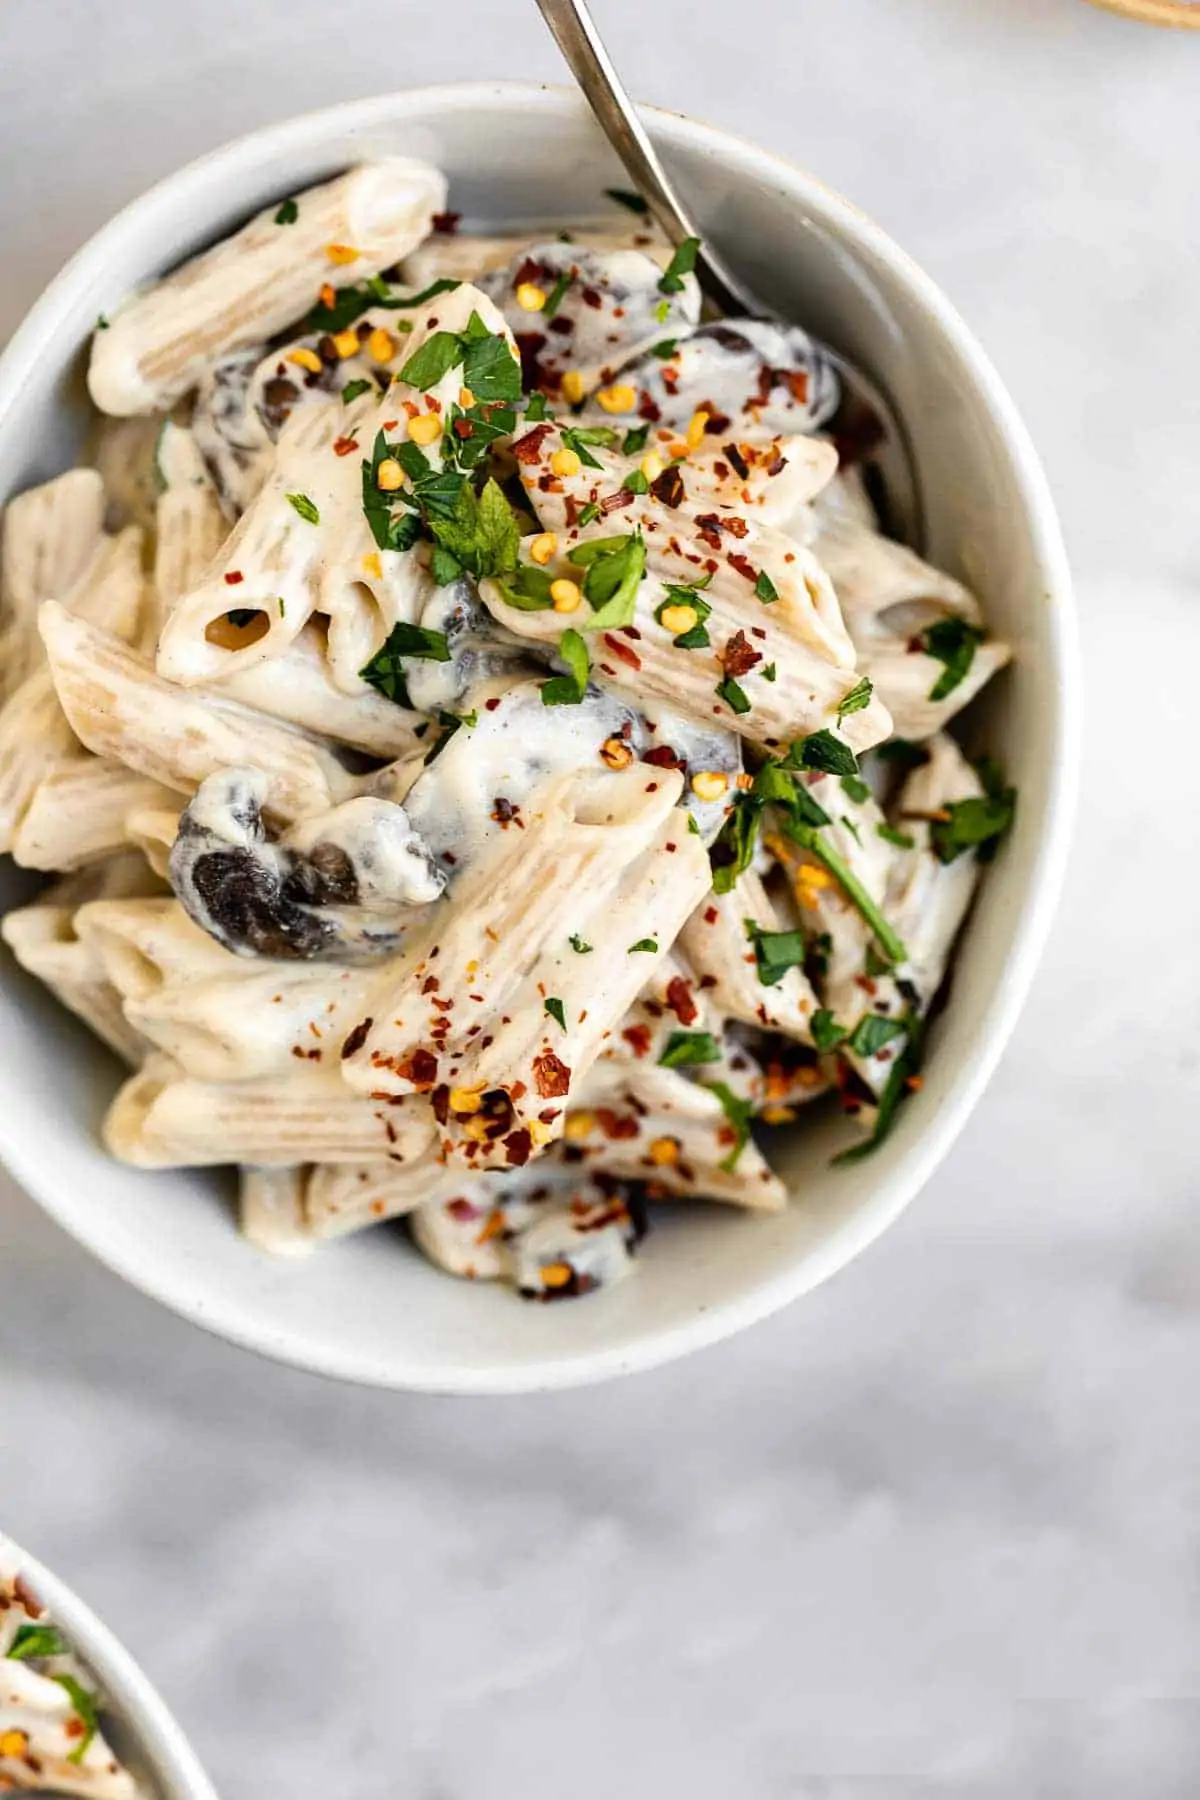 Cashew cream sauce with mushrooms and penne.